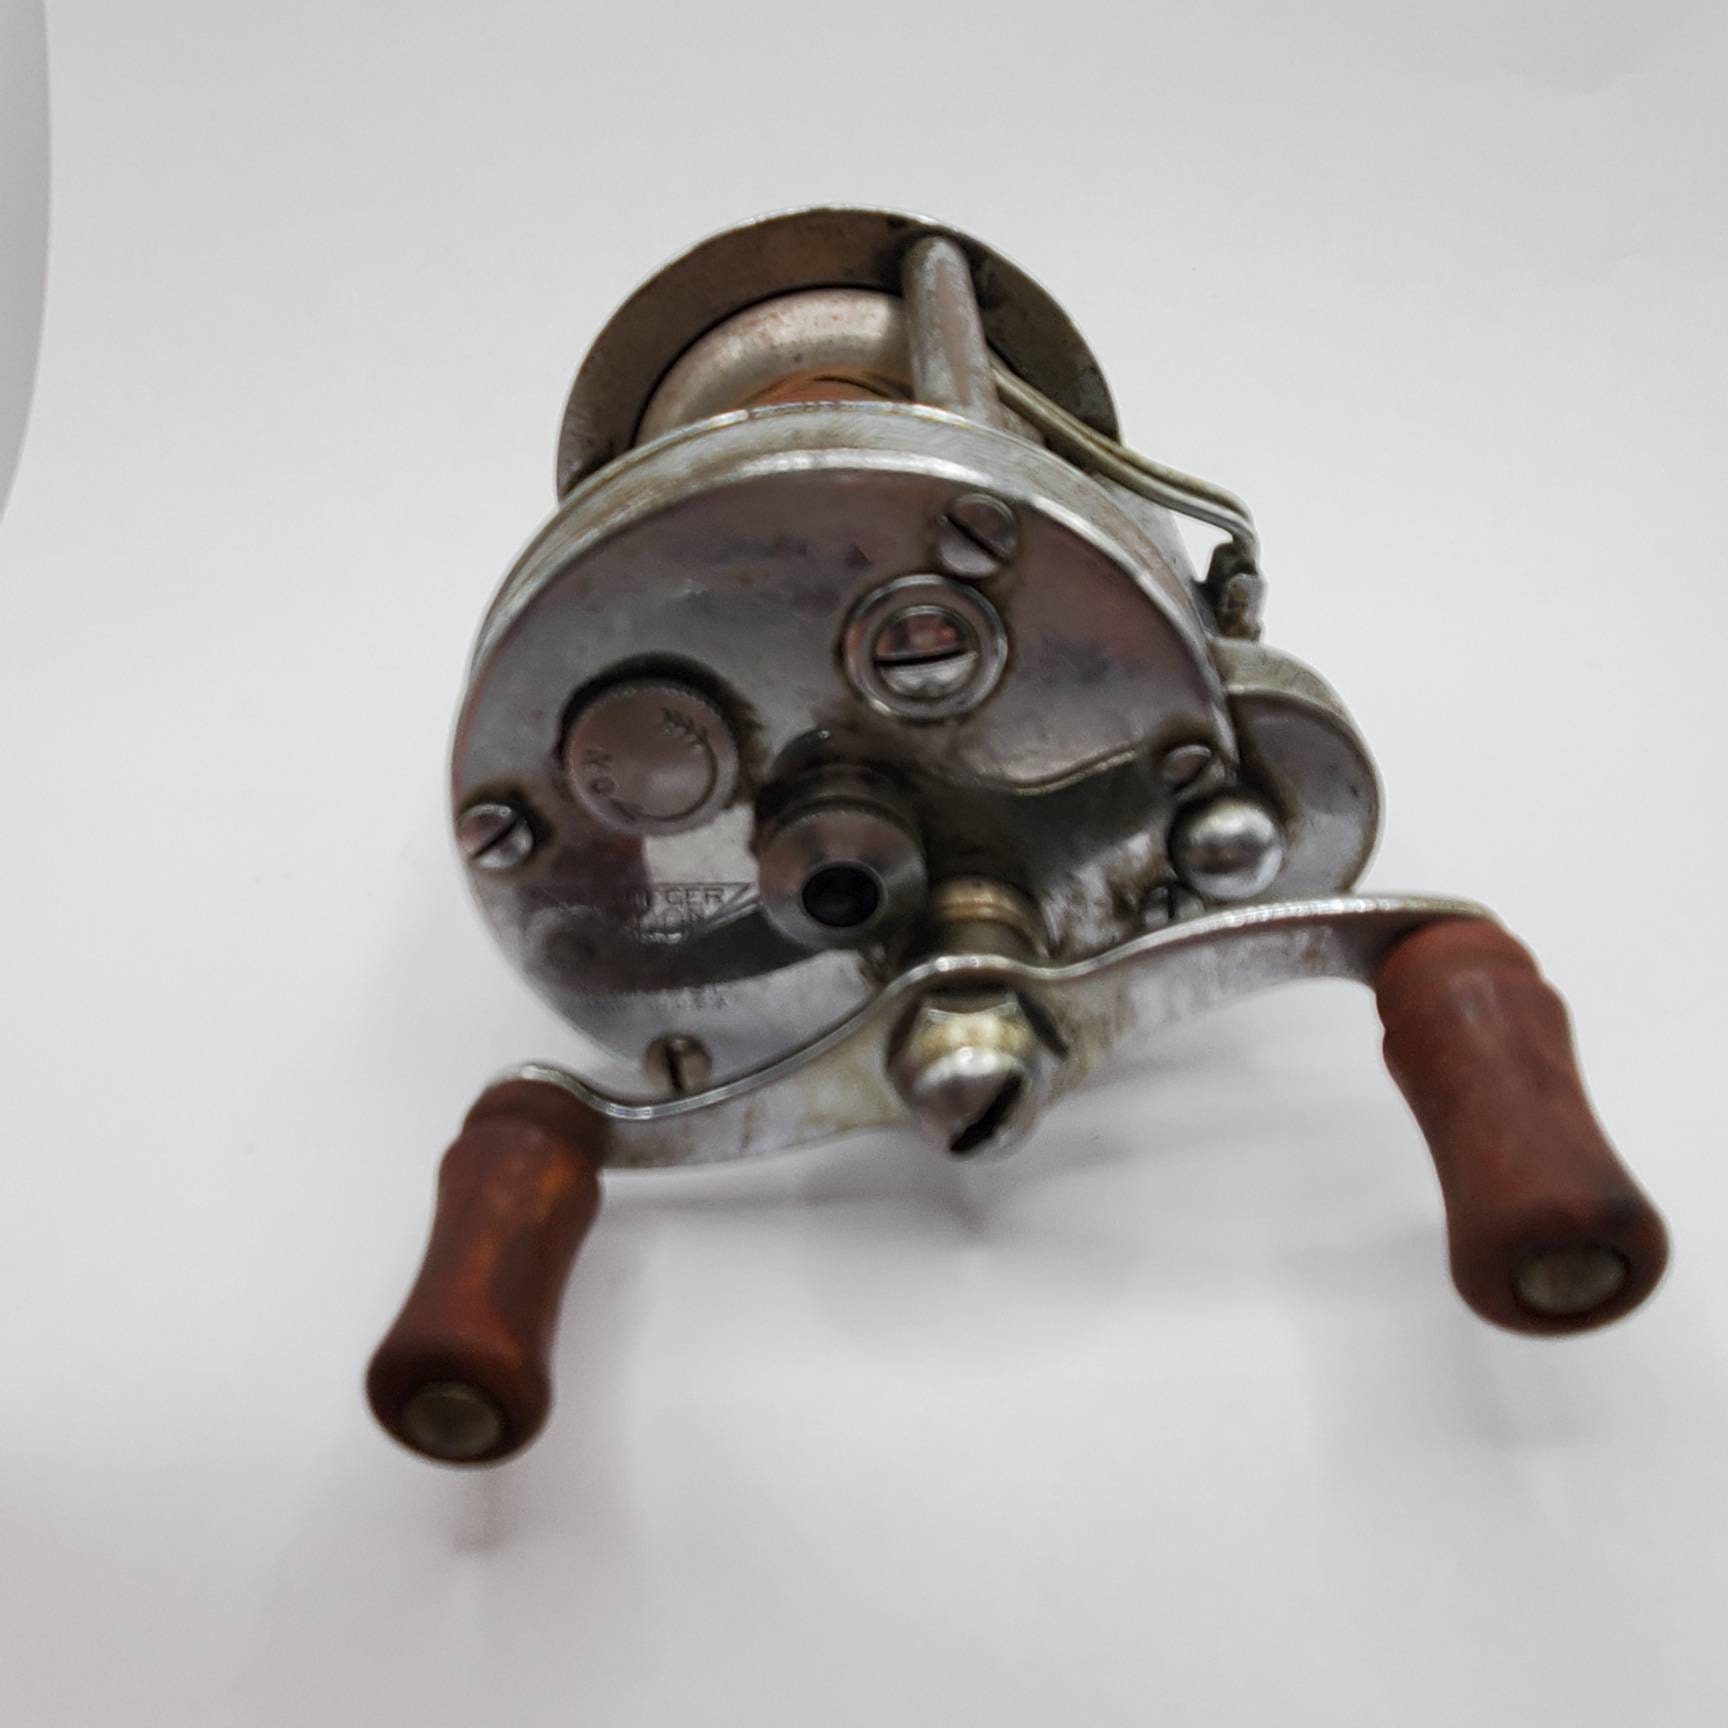 HISTORY OF PFLUEGER BAIT CASTING REELS 1901-1982 - Fin & Flame